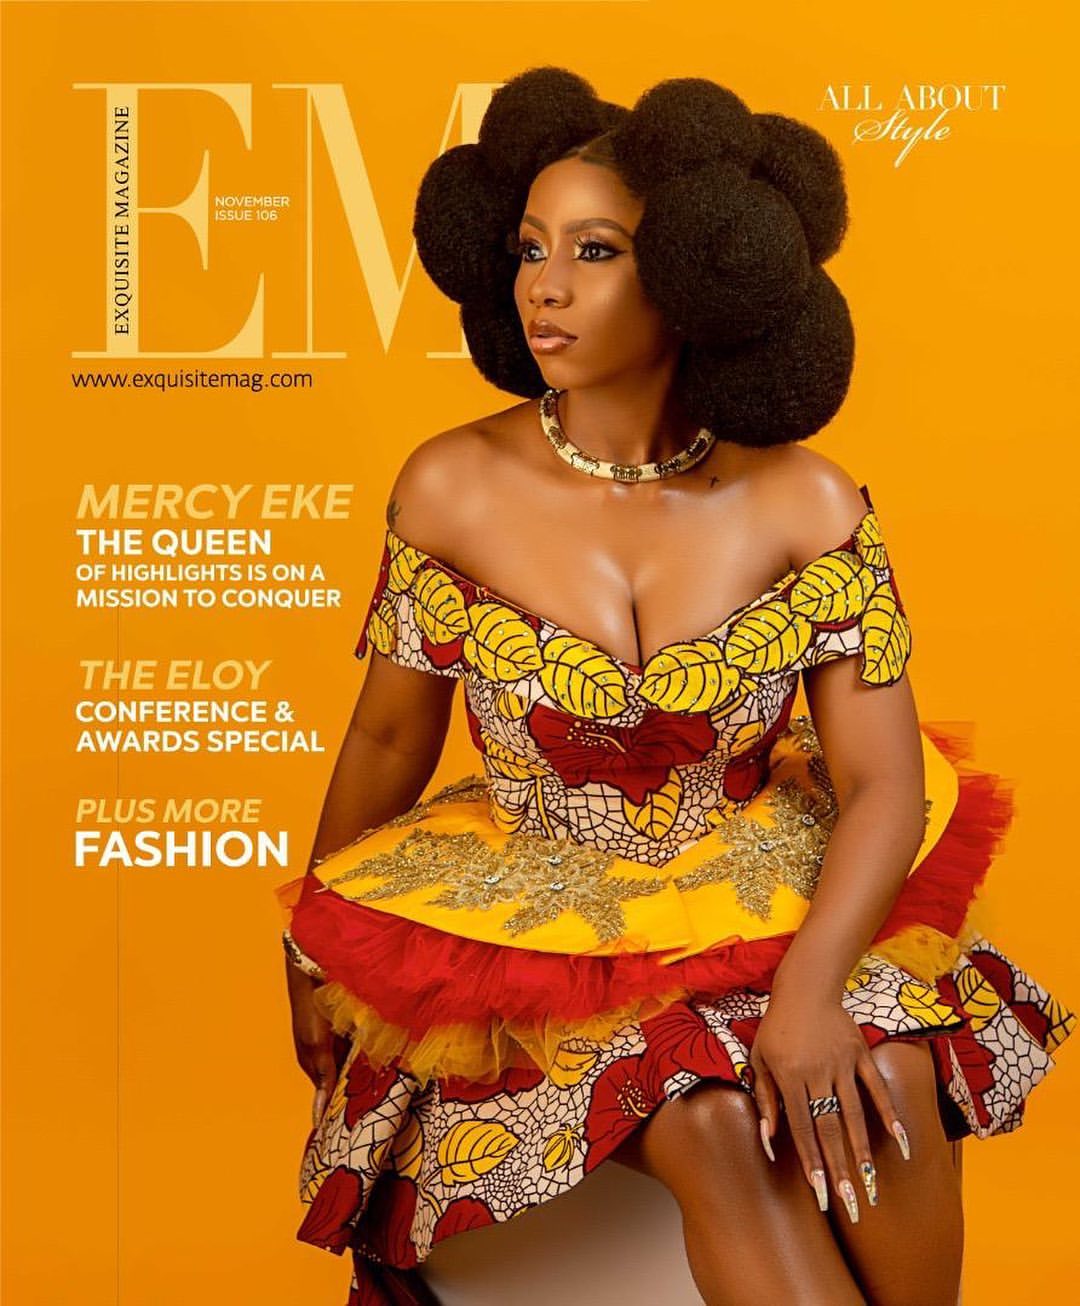 I am a proud Igbo girl - Mercy says as she covers the front page of Exquisite Magazine